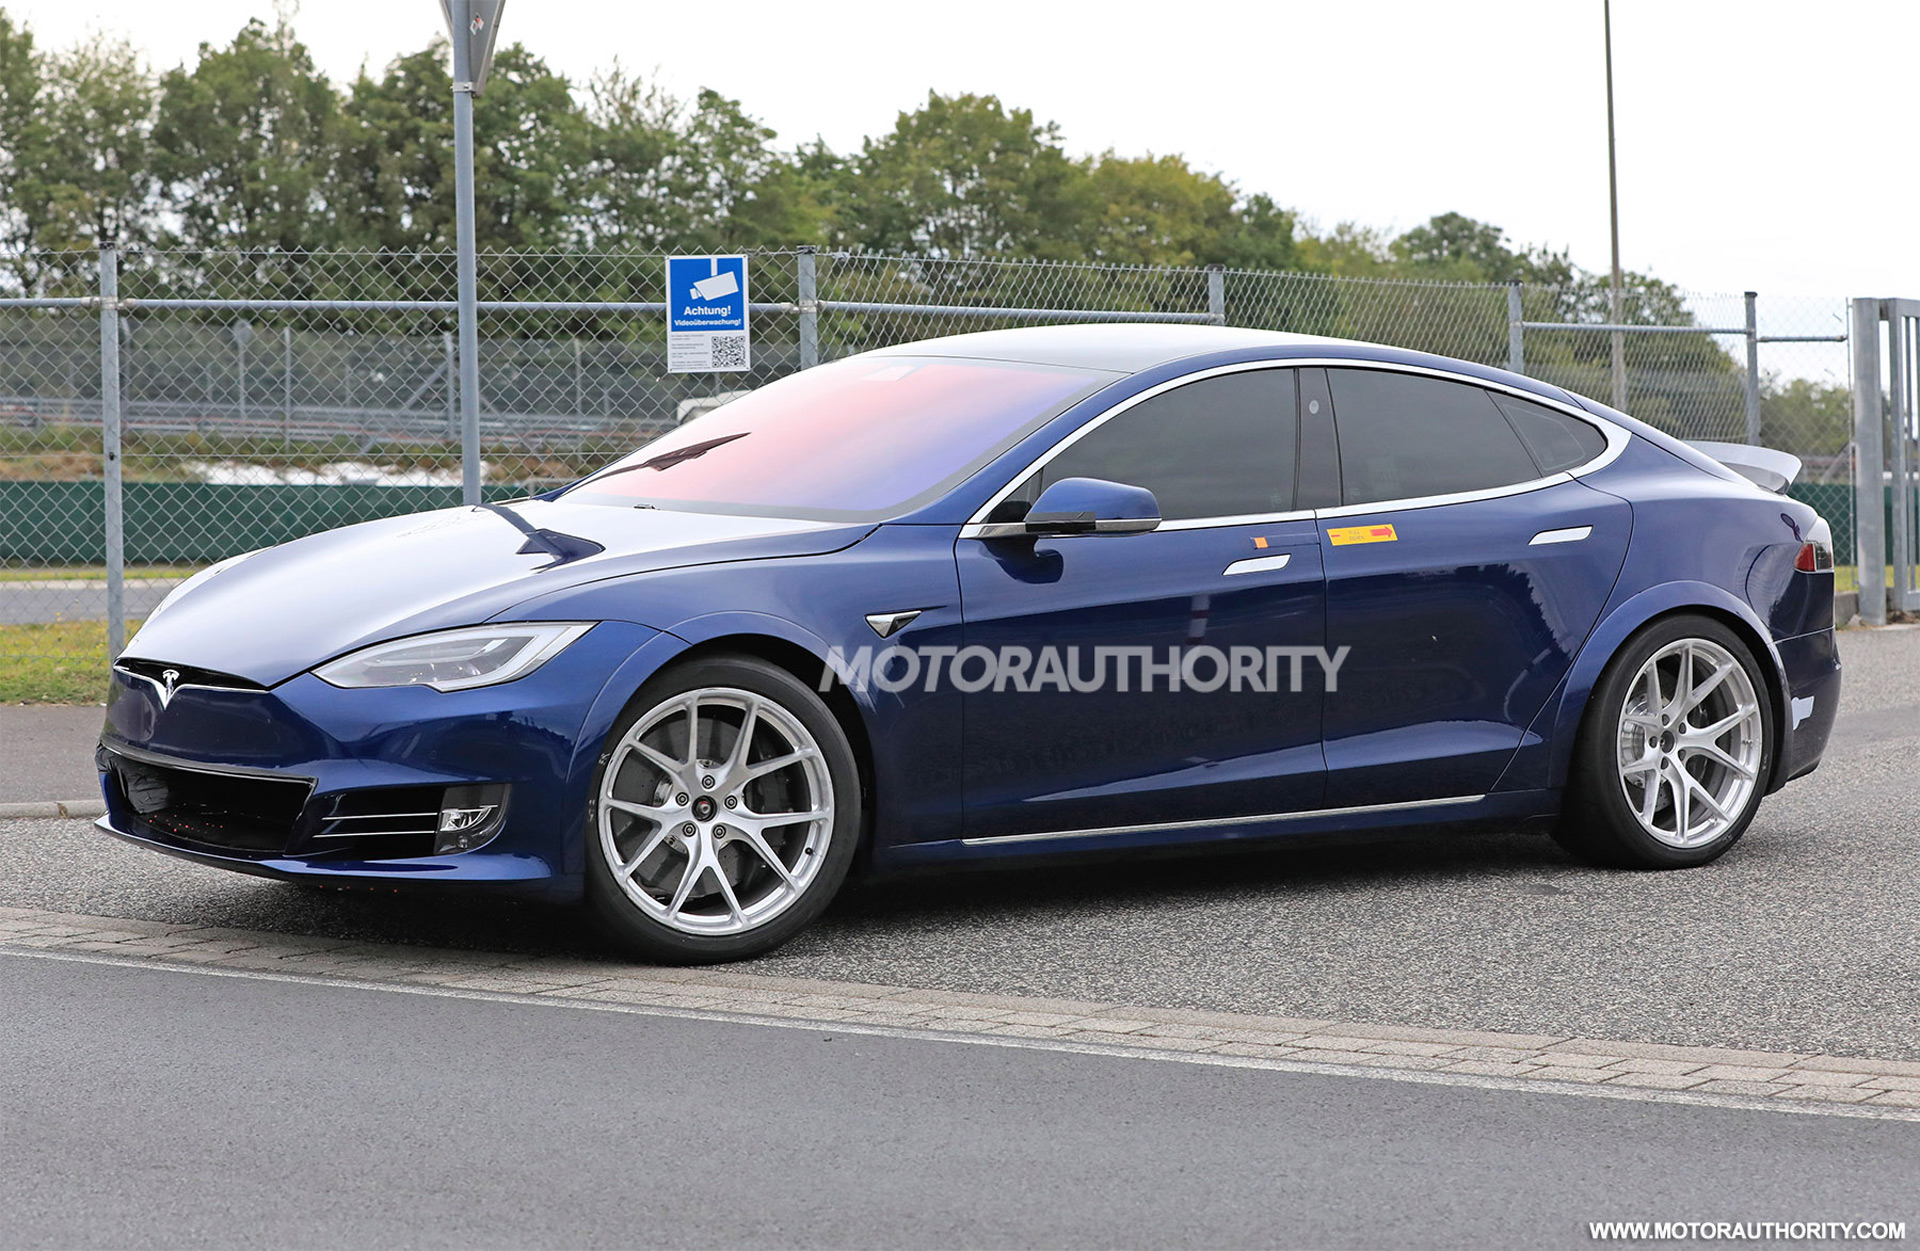 Tesla Model S Nurburgring without reporting completed